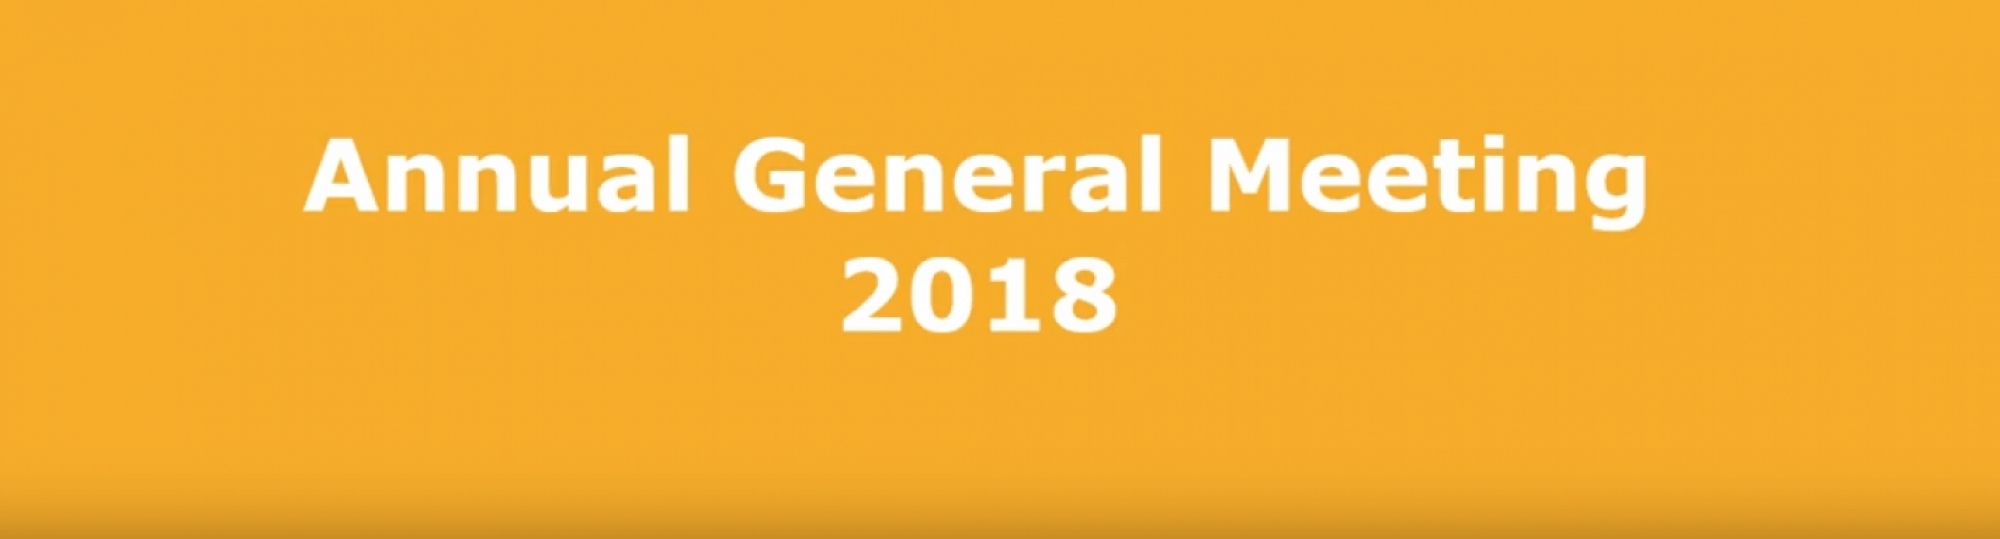 Highlights of the Year - AGM 2018